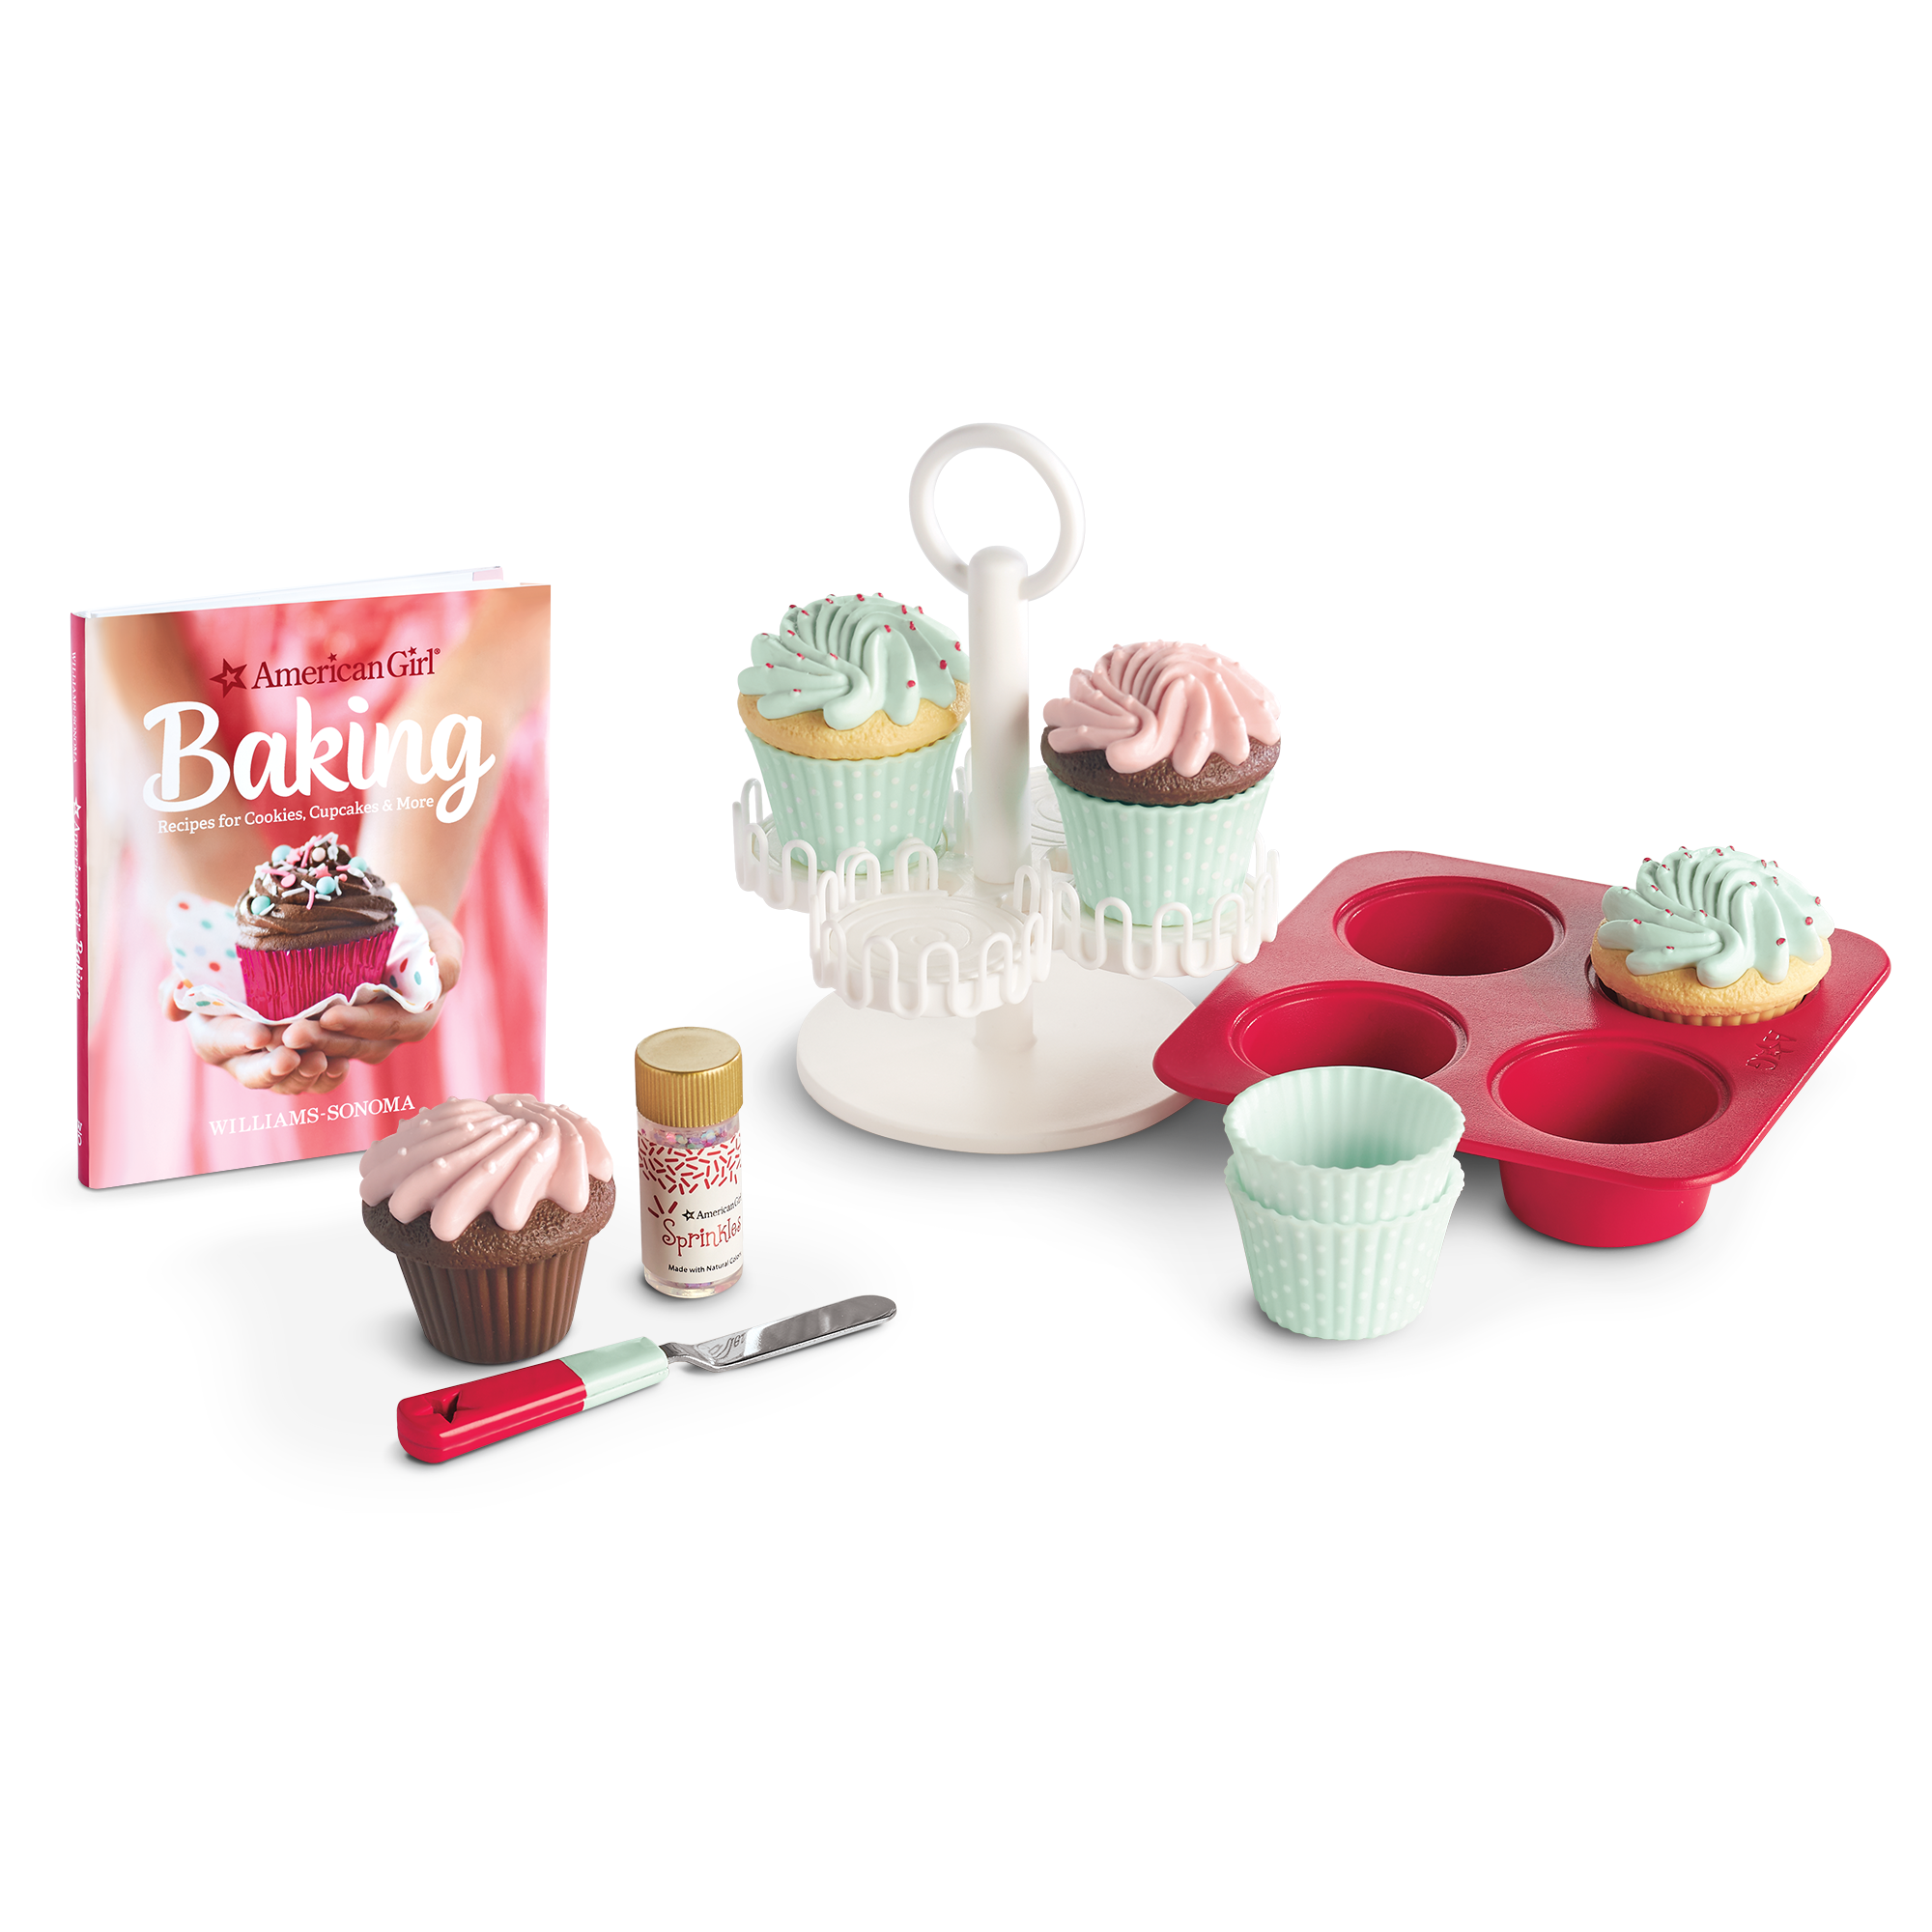 American Girl Baking Gift Set: Recipes for Cookies, Cupcakes